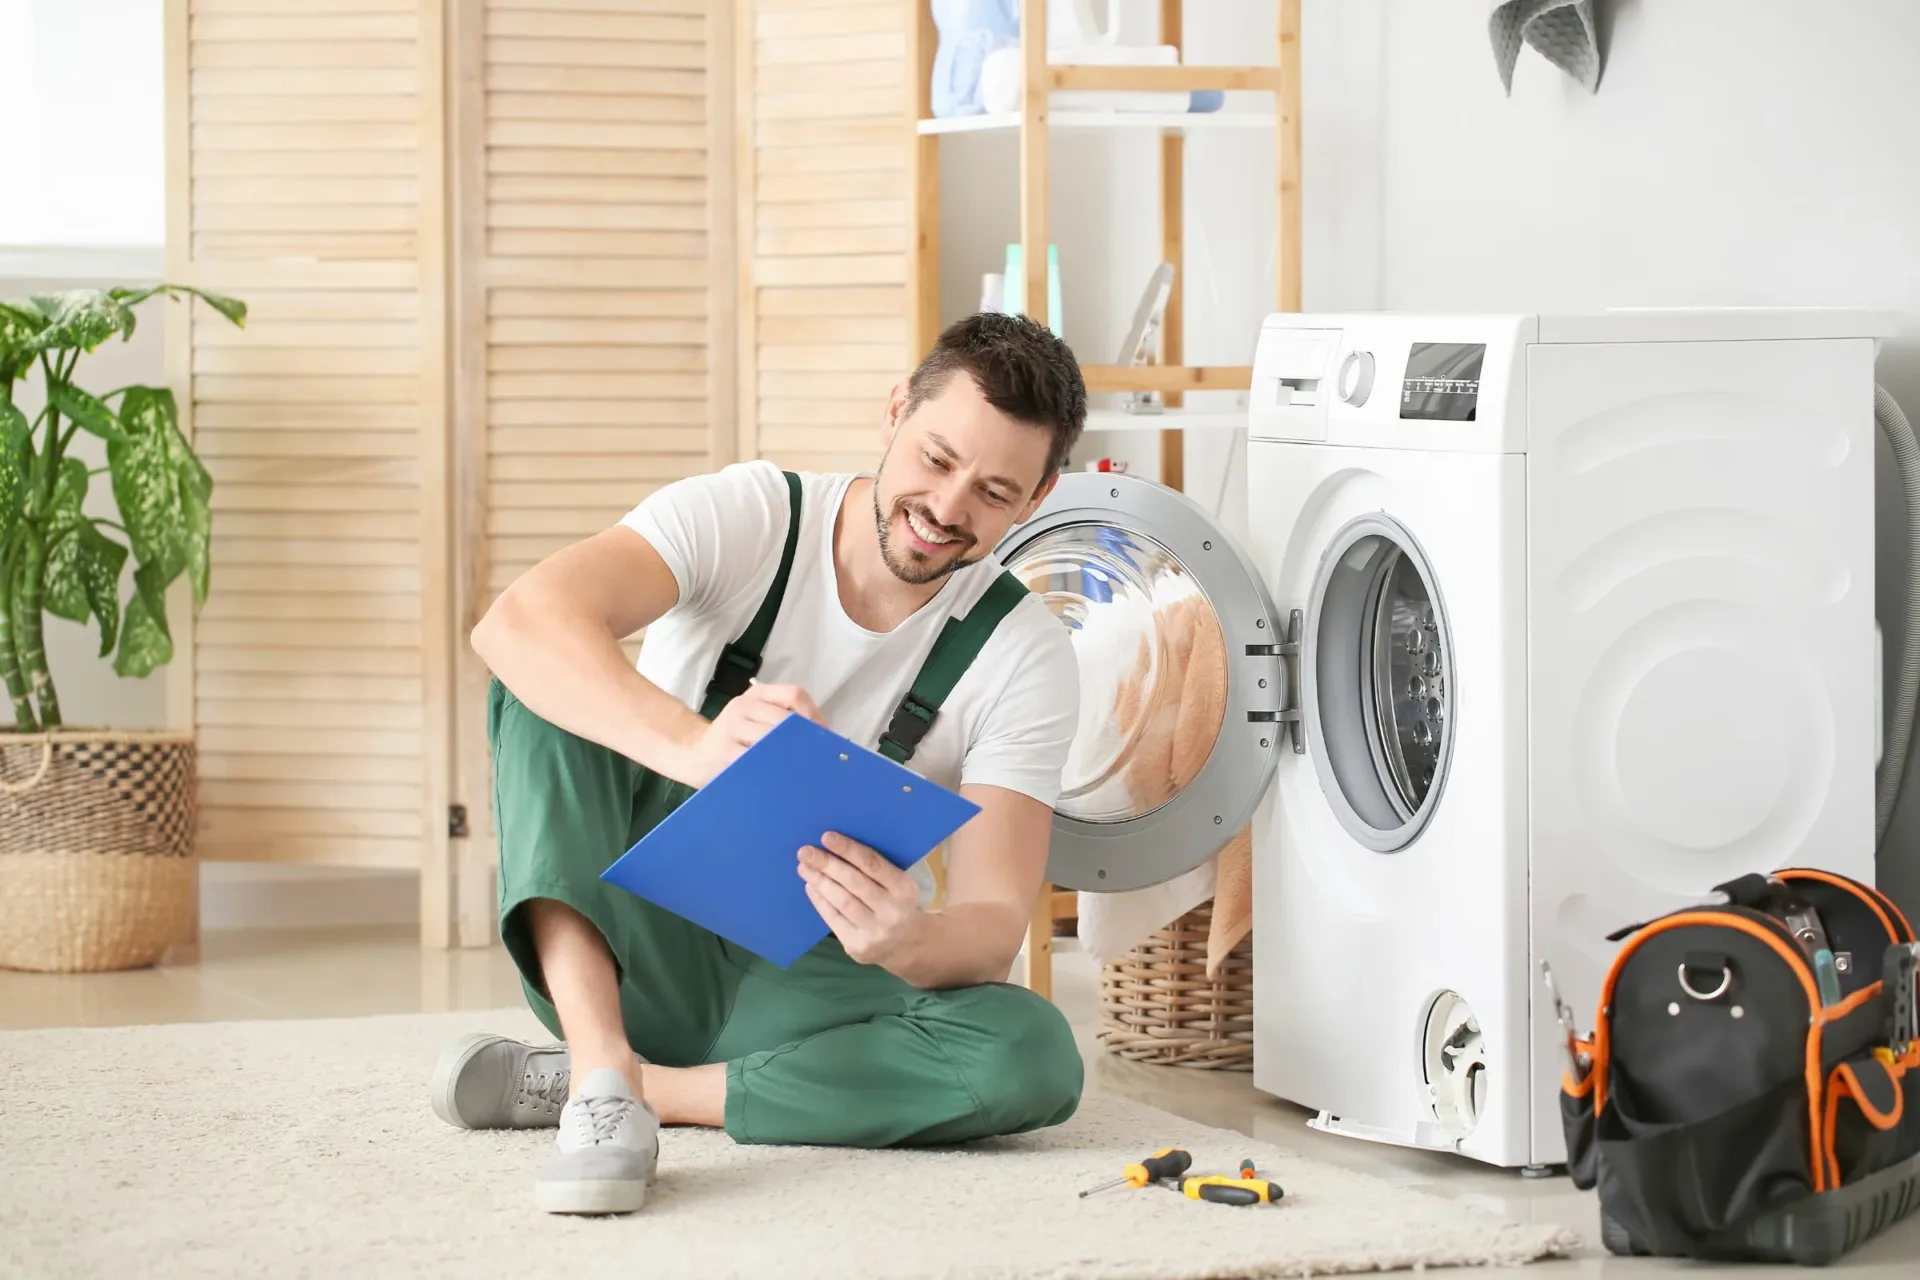 our samsung authorised repair services can help get your appliances up and running today